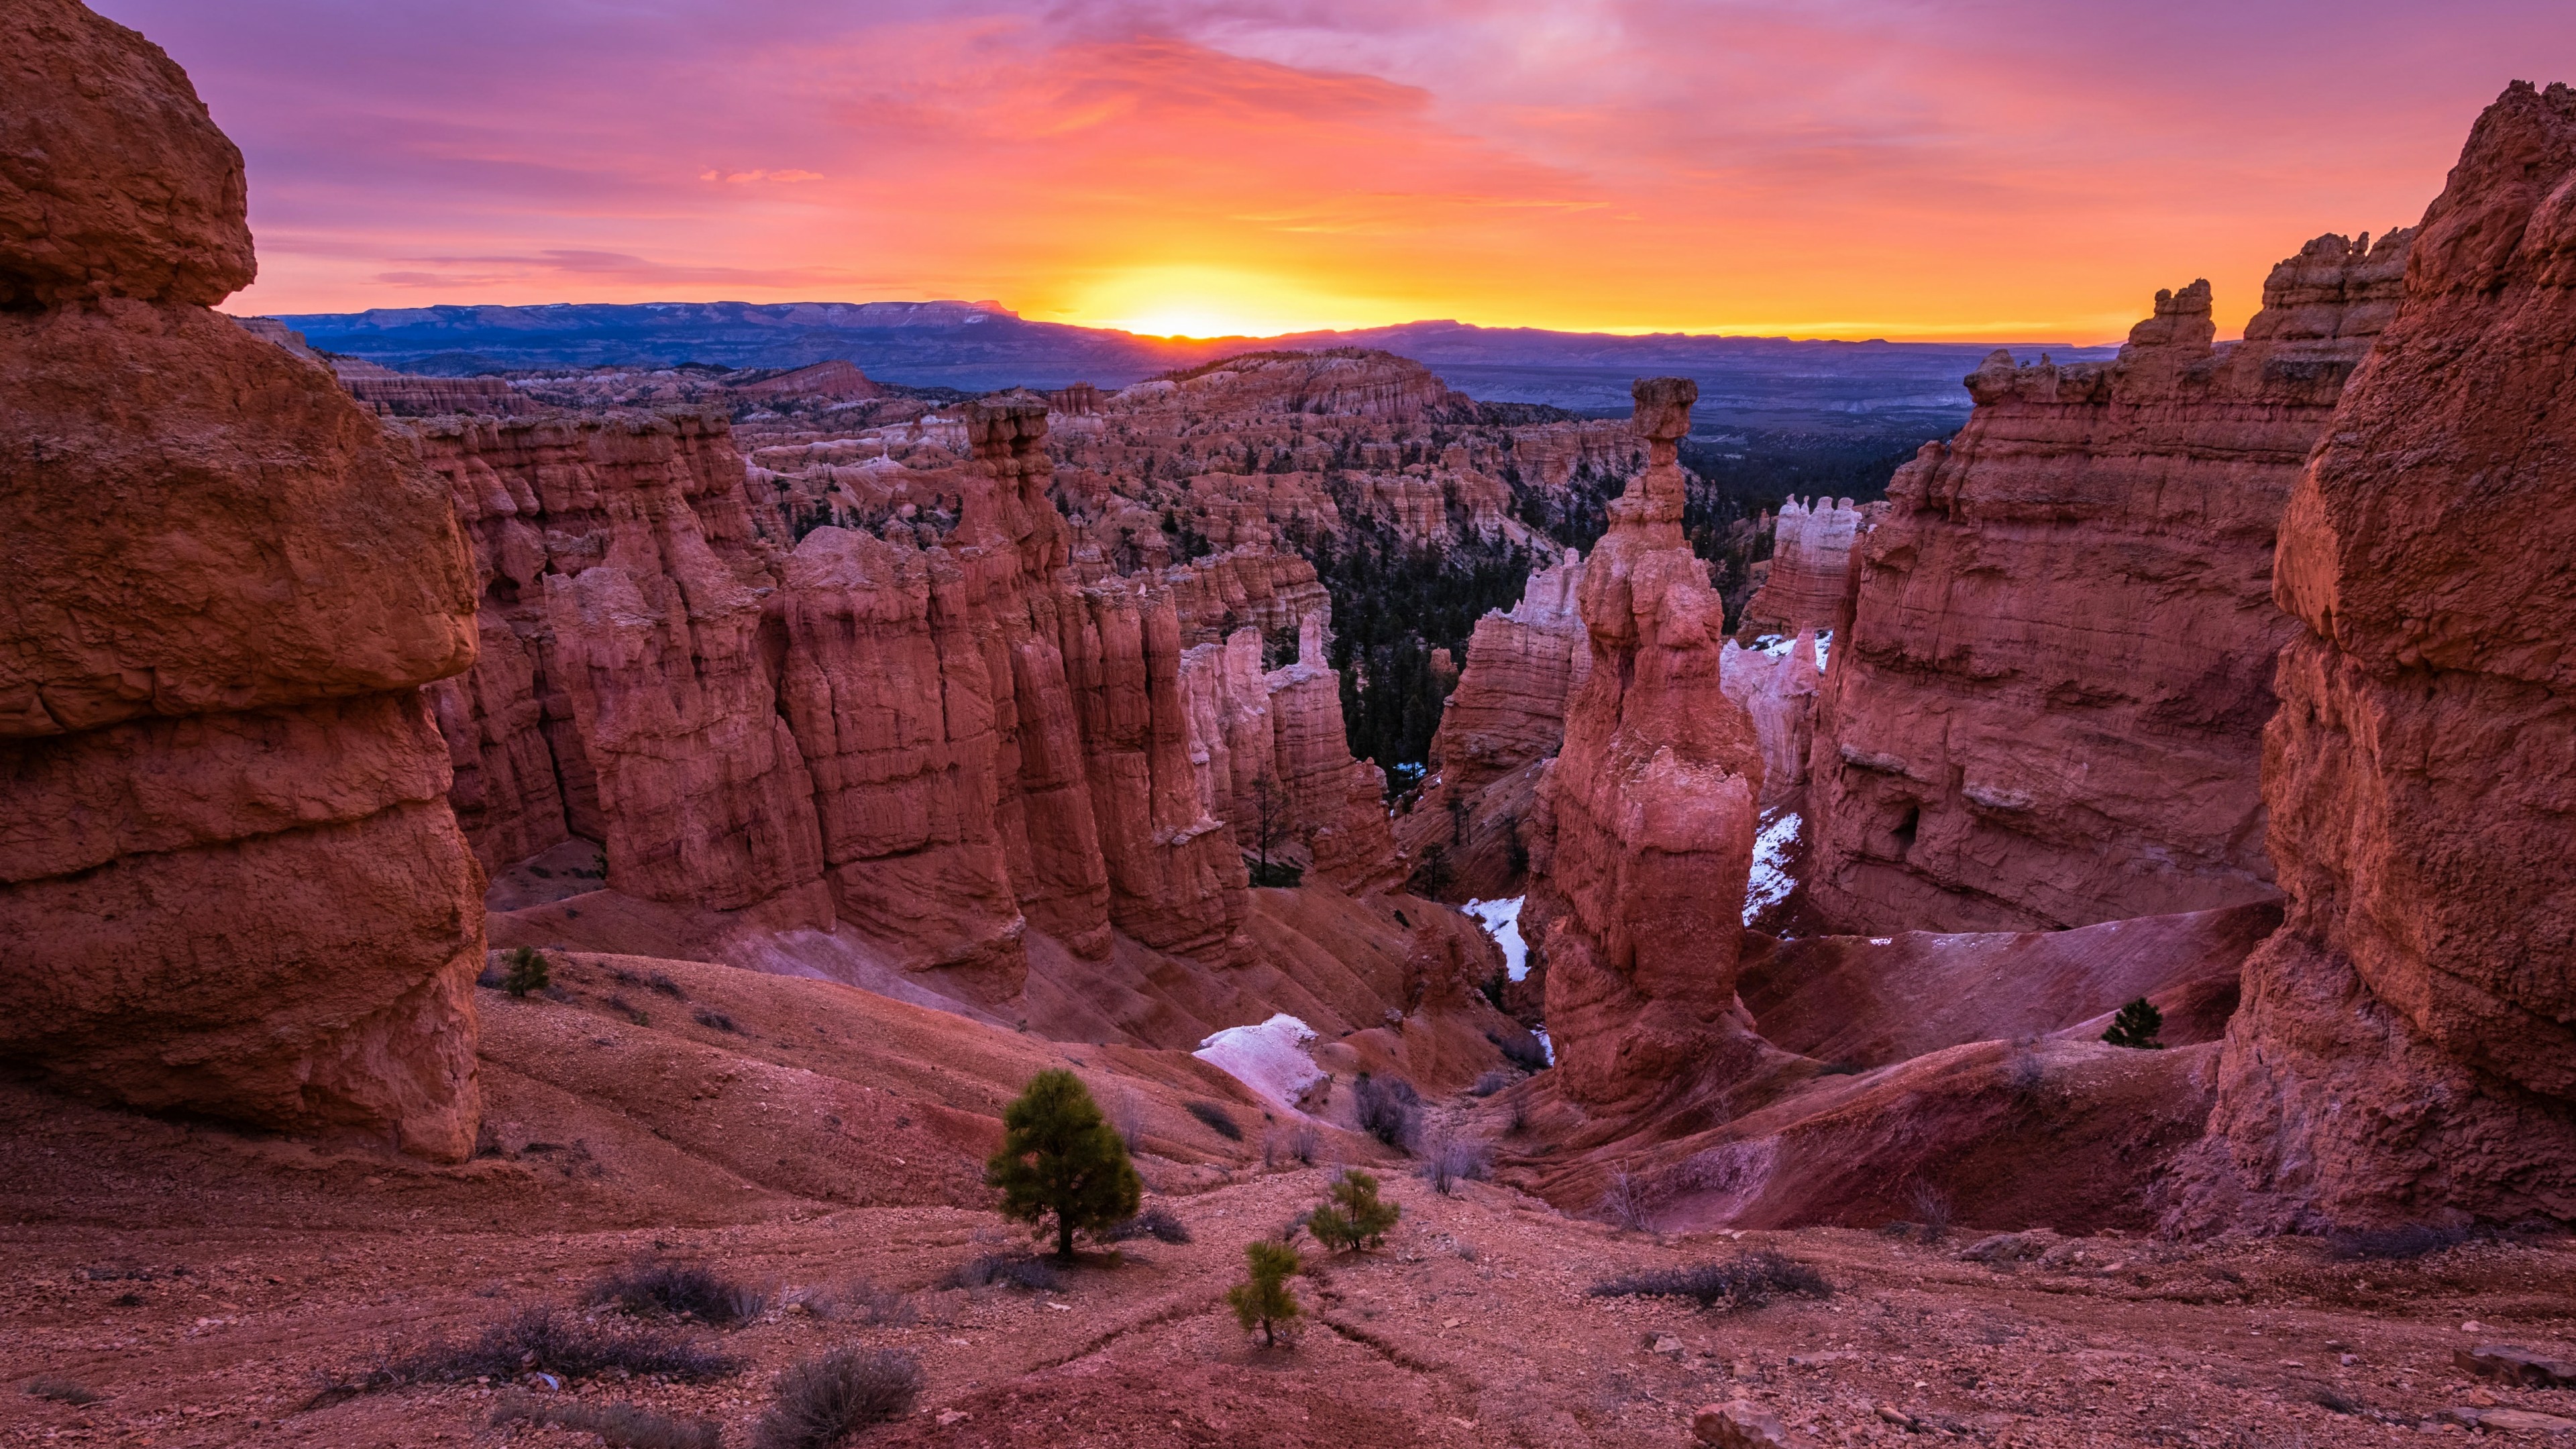 Sunset in Bryce Canyon National Park wallpaper - backiee